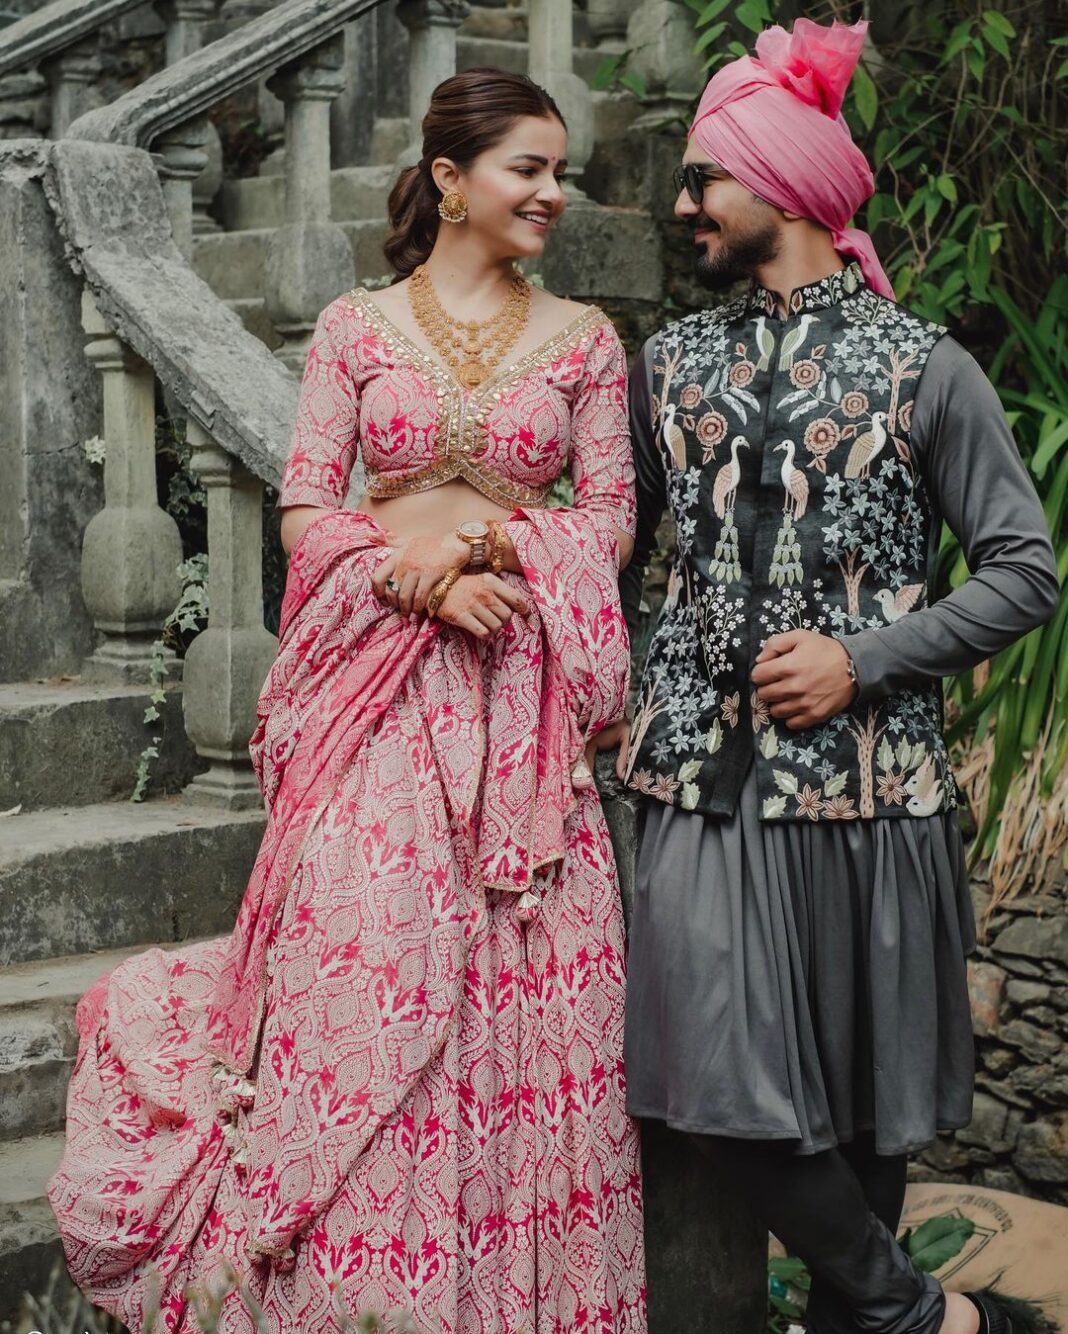 Rubina Dilaik Instagram - We recreated our iconic wedding pic! Same place, same time of the day just 4 years and few months older but much fitter & together ! ❤️❤️ @rubinadilaik Styled by @stylingbyvictor @sohail__mughal___ Pink lehanga @soniyagofficial @megaan.india Me Styled by @stylingbyvictor @sohail__mughal___ Kurta and jacket @attirekunalnsid 📷@raabta.studios